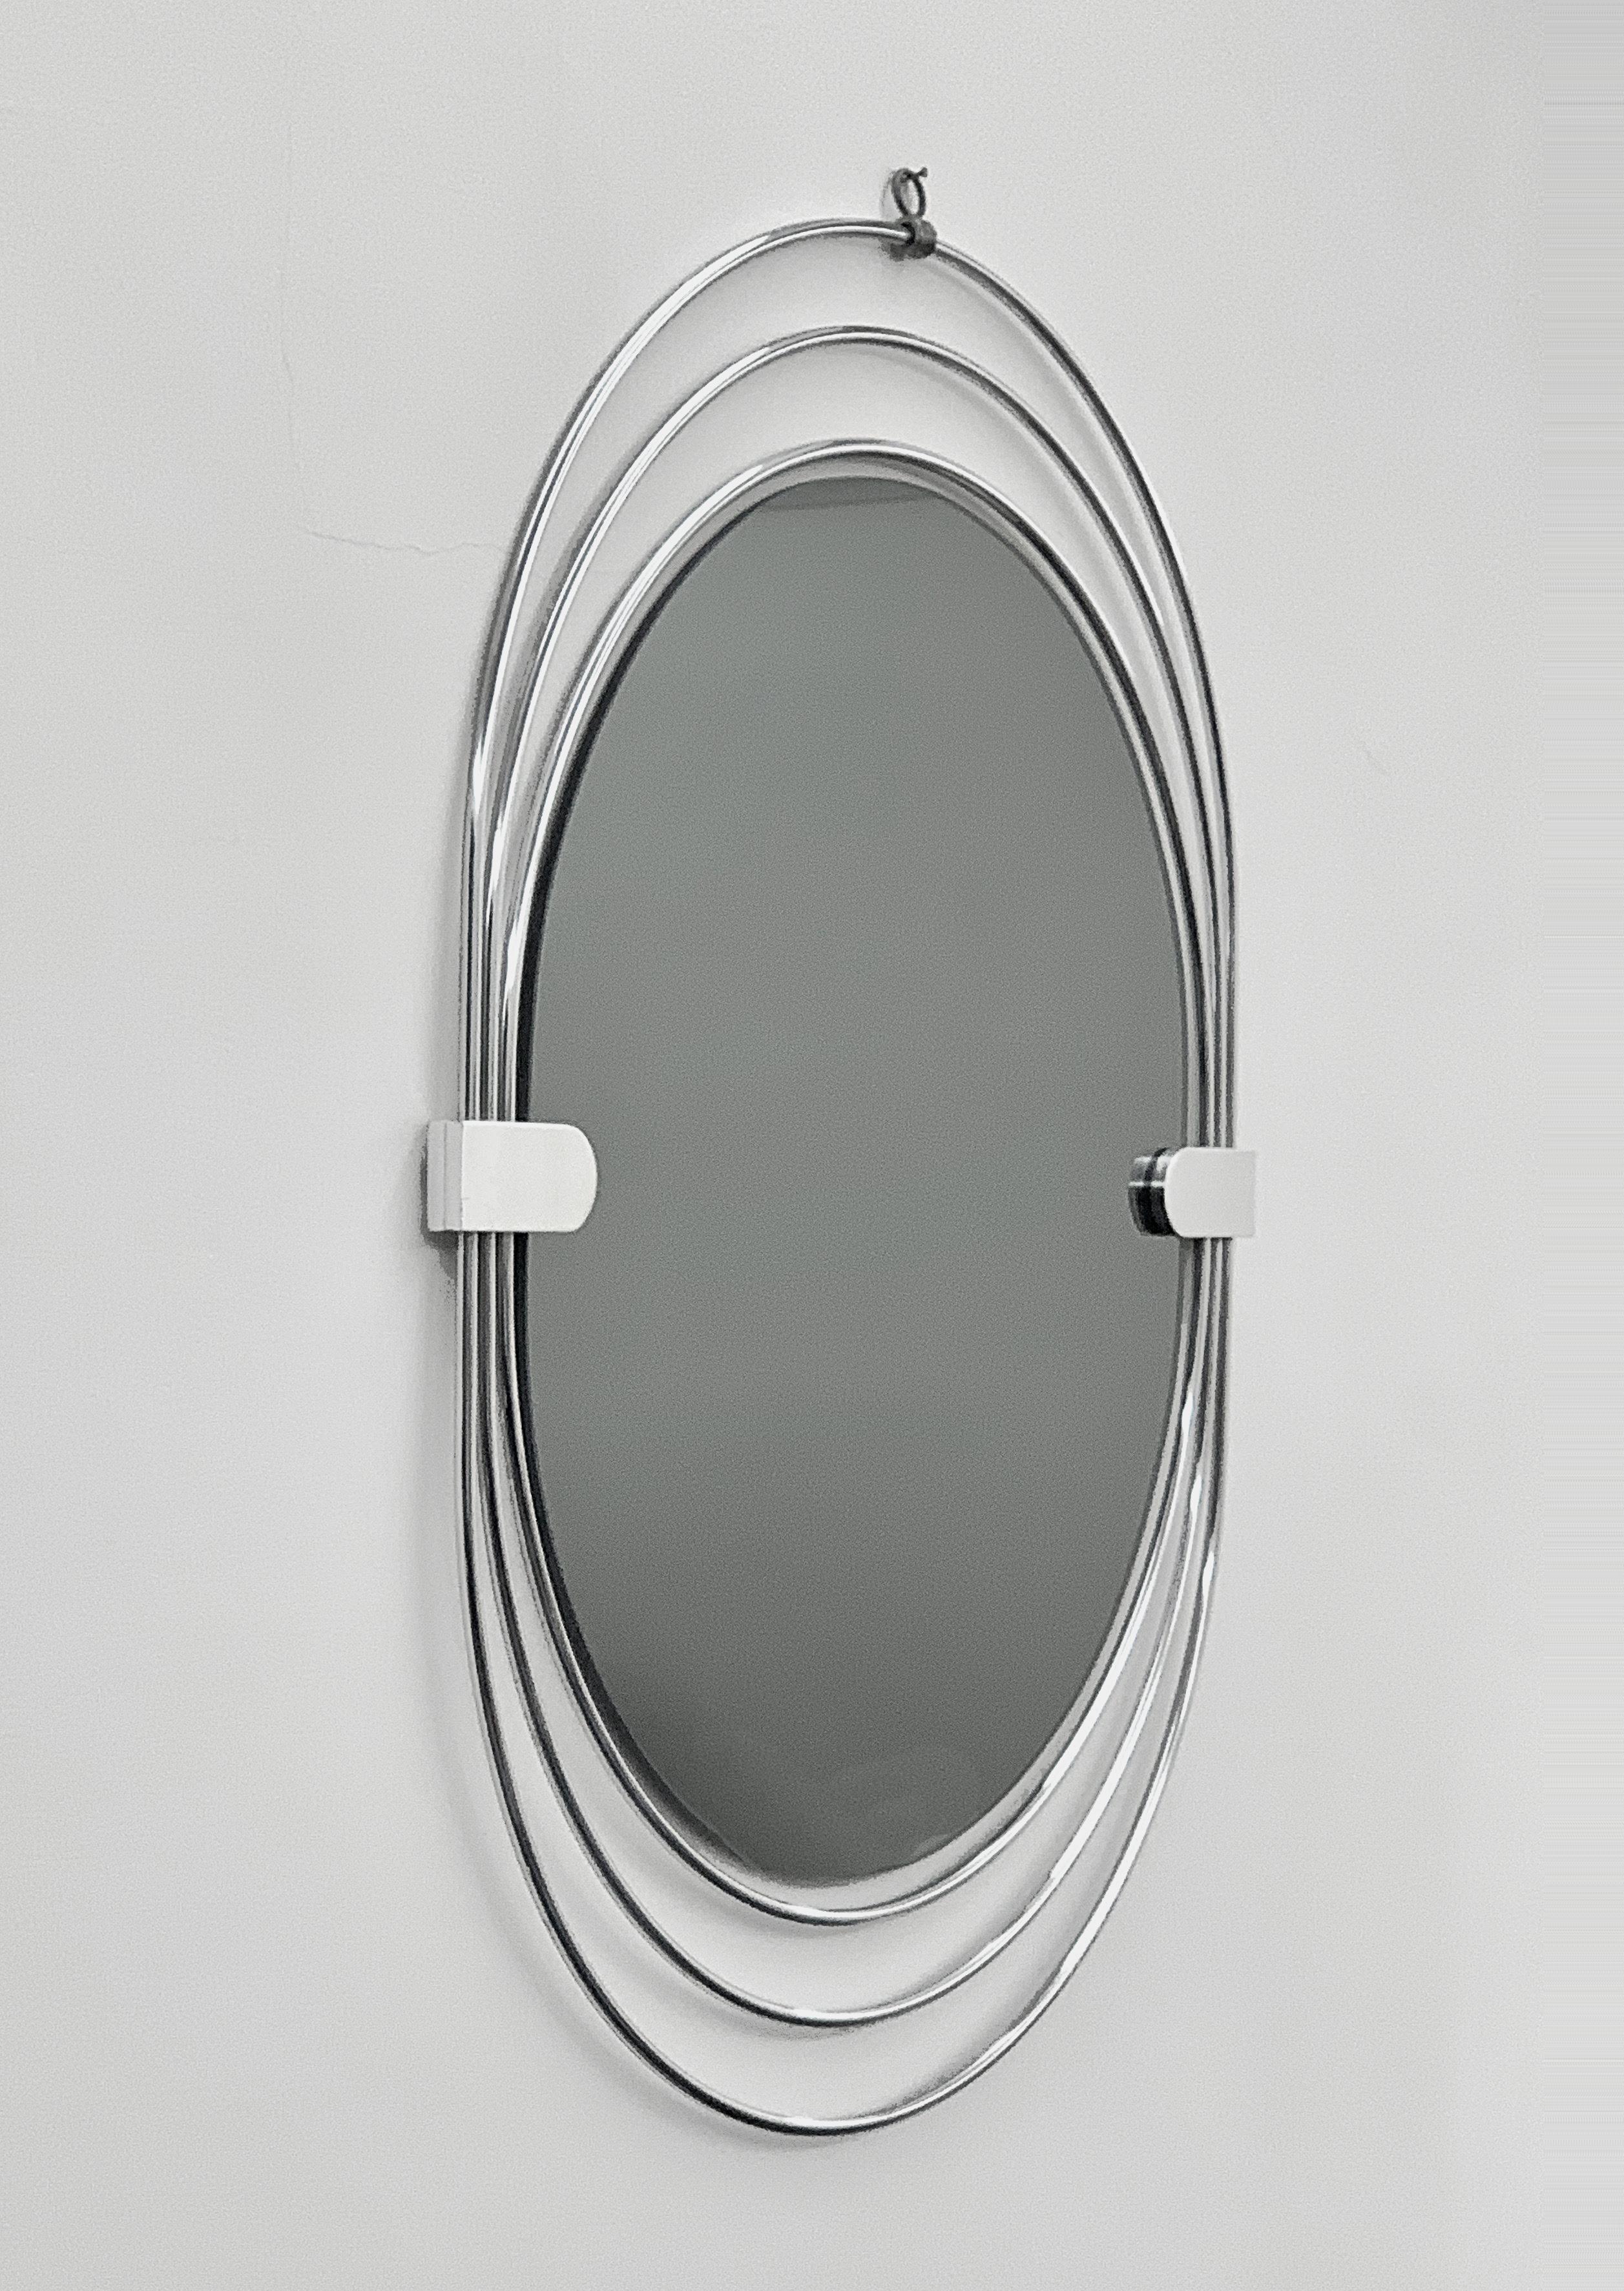 Mid-Century Modern Oval Wall Mirror in Stainless Steel, Triple Frame, Smoked Mirror, Italy, 1970s For Sale